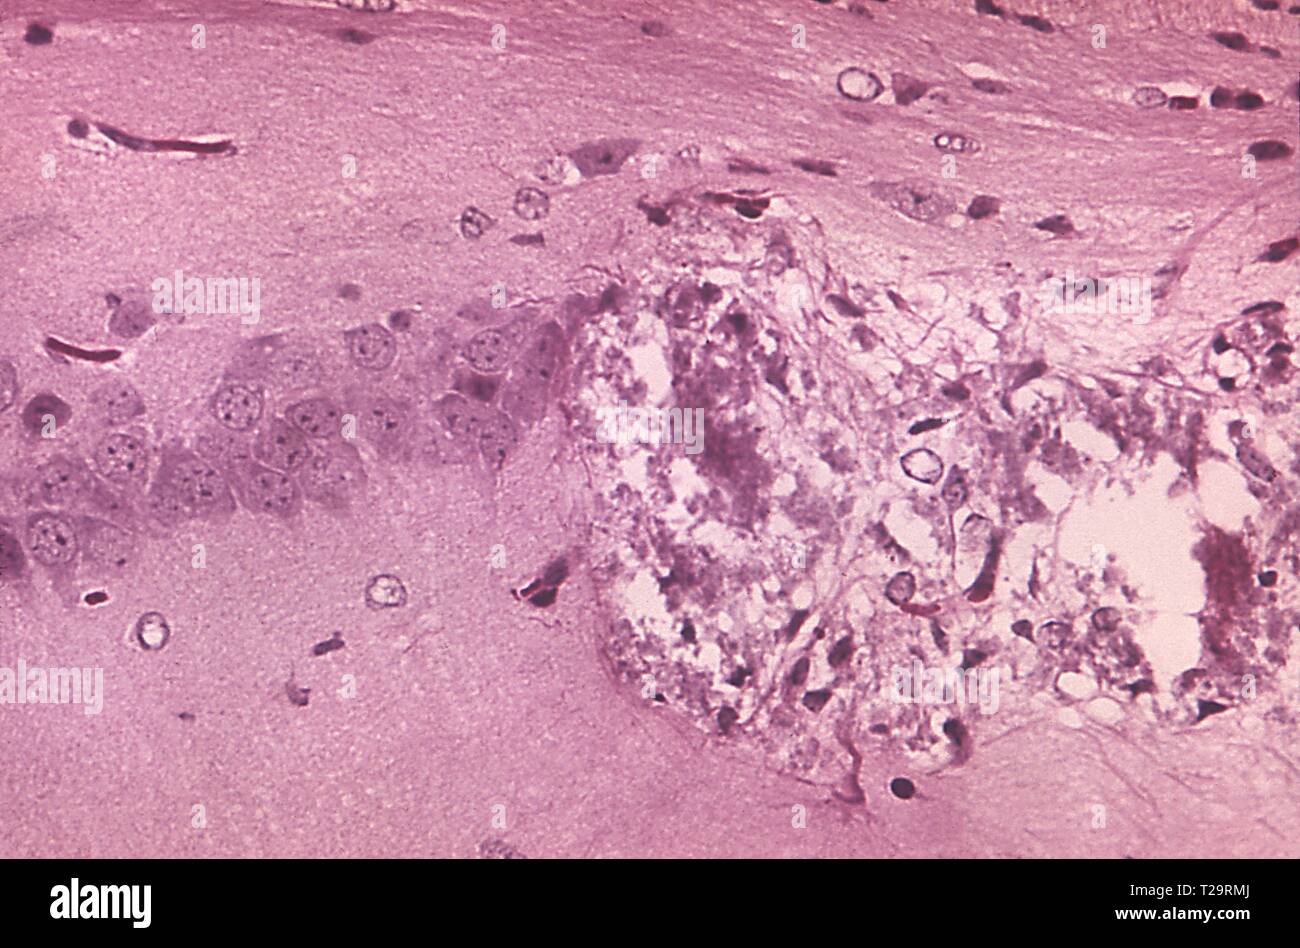 Hematoxylin-eosin stained photomicrograph of the cellular pathology associated with Tamiami virus encephalitis, 1972. Image courtesy Centers for Disease Control and Prevention (CDC) / Dr W. Winn. () Stock Photo